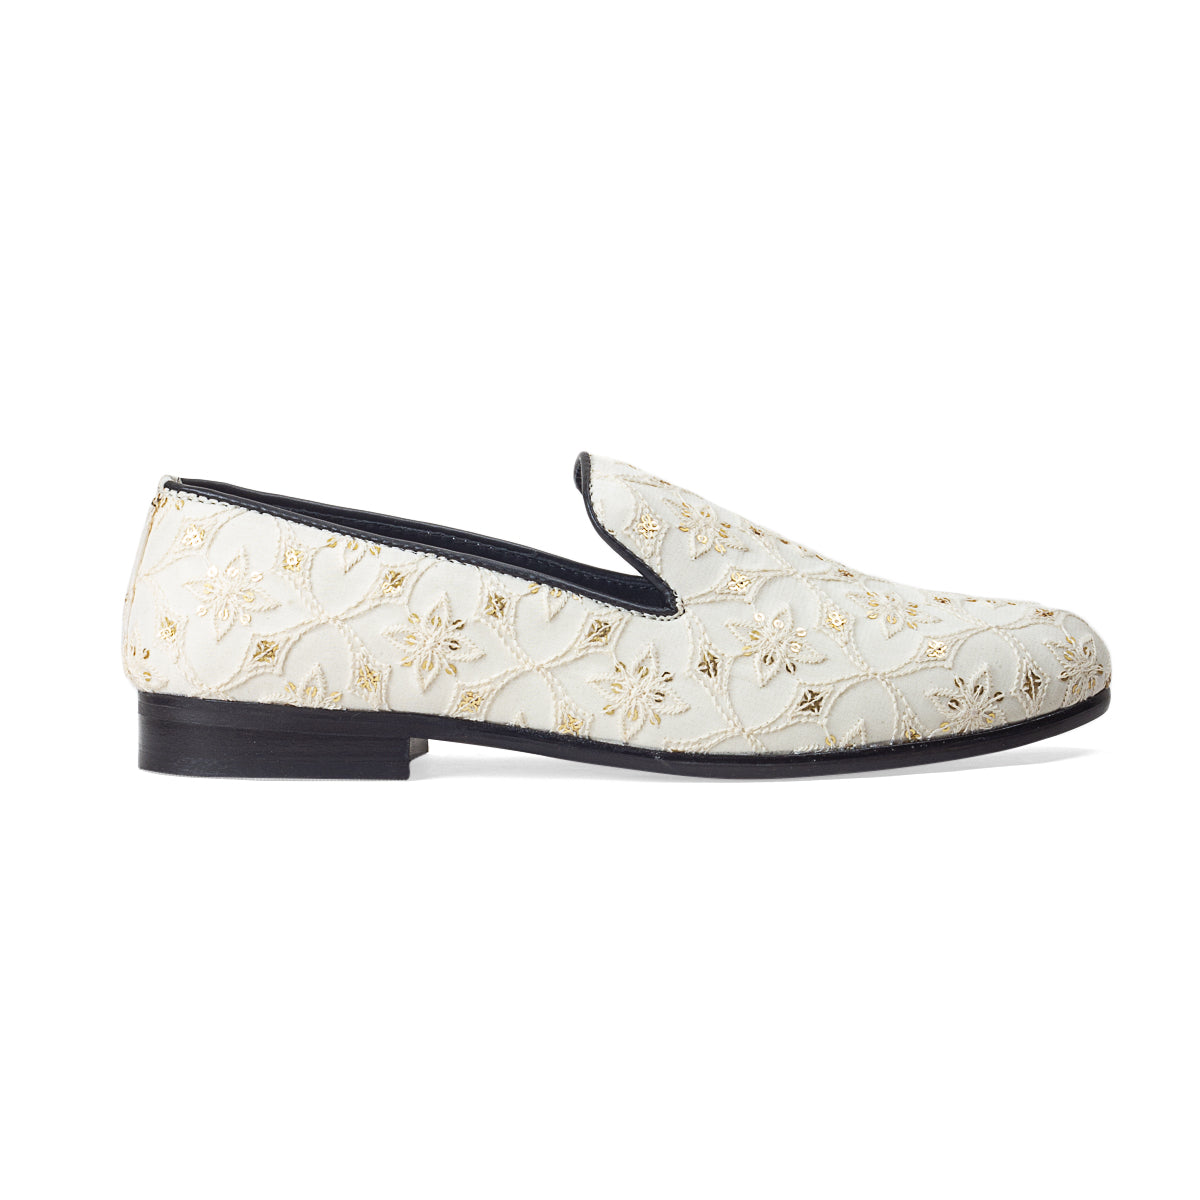 Lucknowi Slipons (Limited Edition)